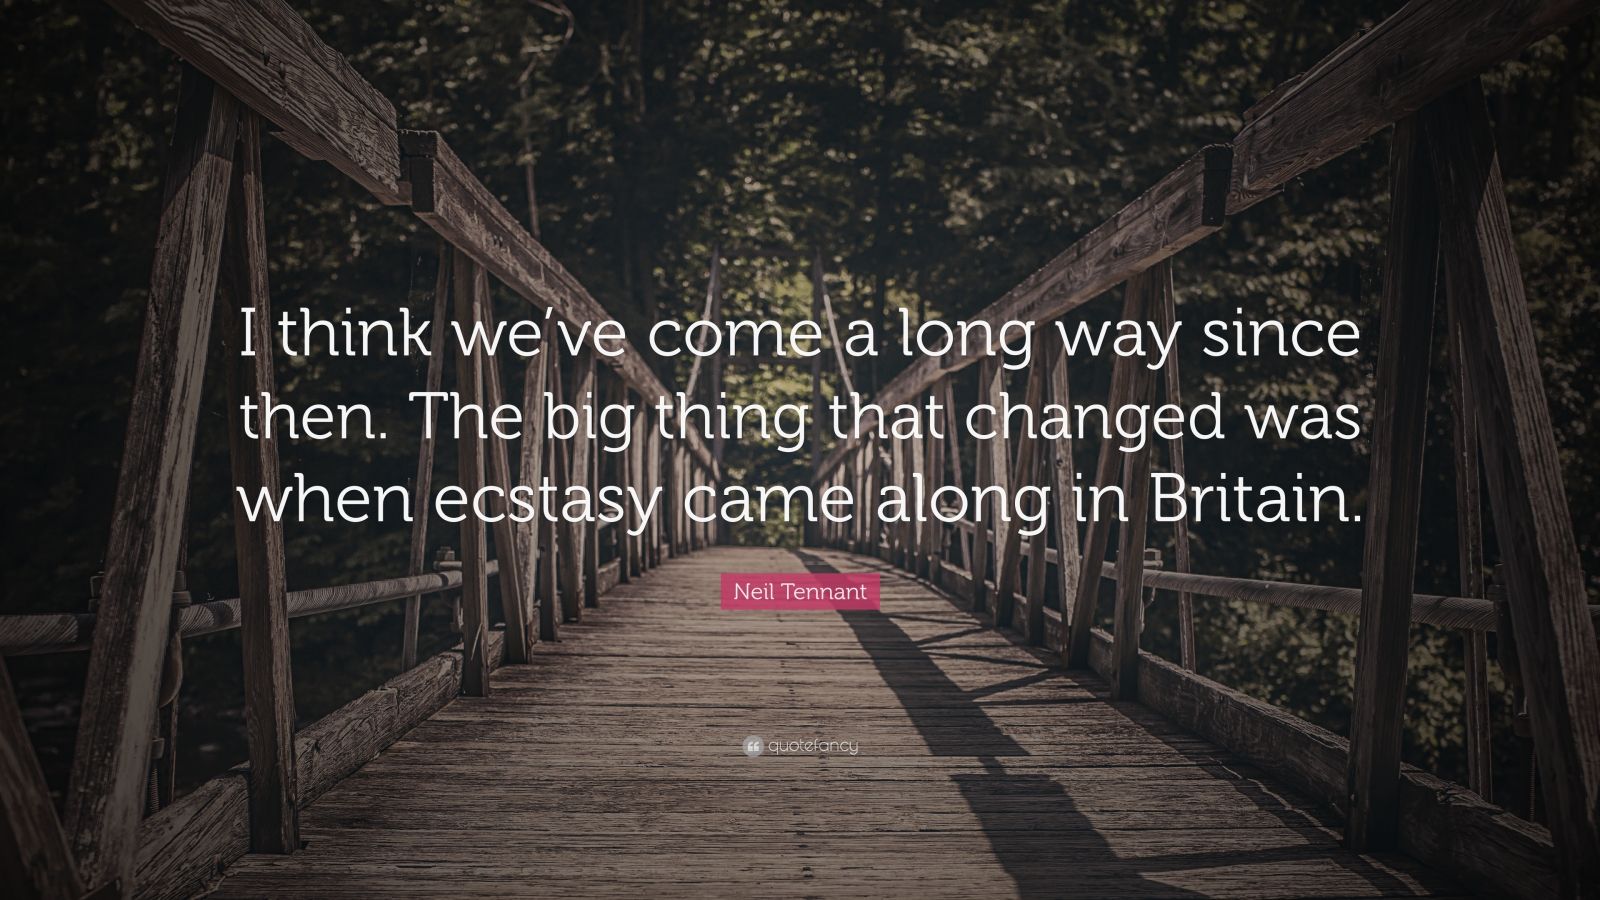 https://quotefancy.com/media/wallpaper/1600x900/4000483-Neil-Tennant-Quote-I-think-we-ve-come-a-long-way-since-then-The.jpg